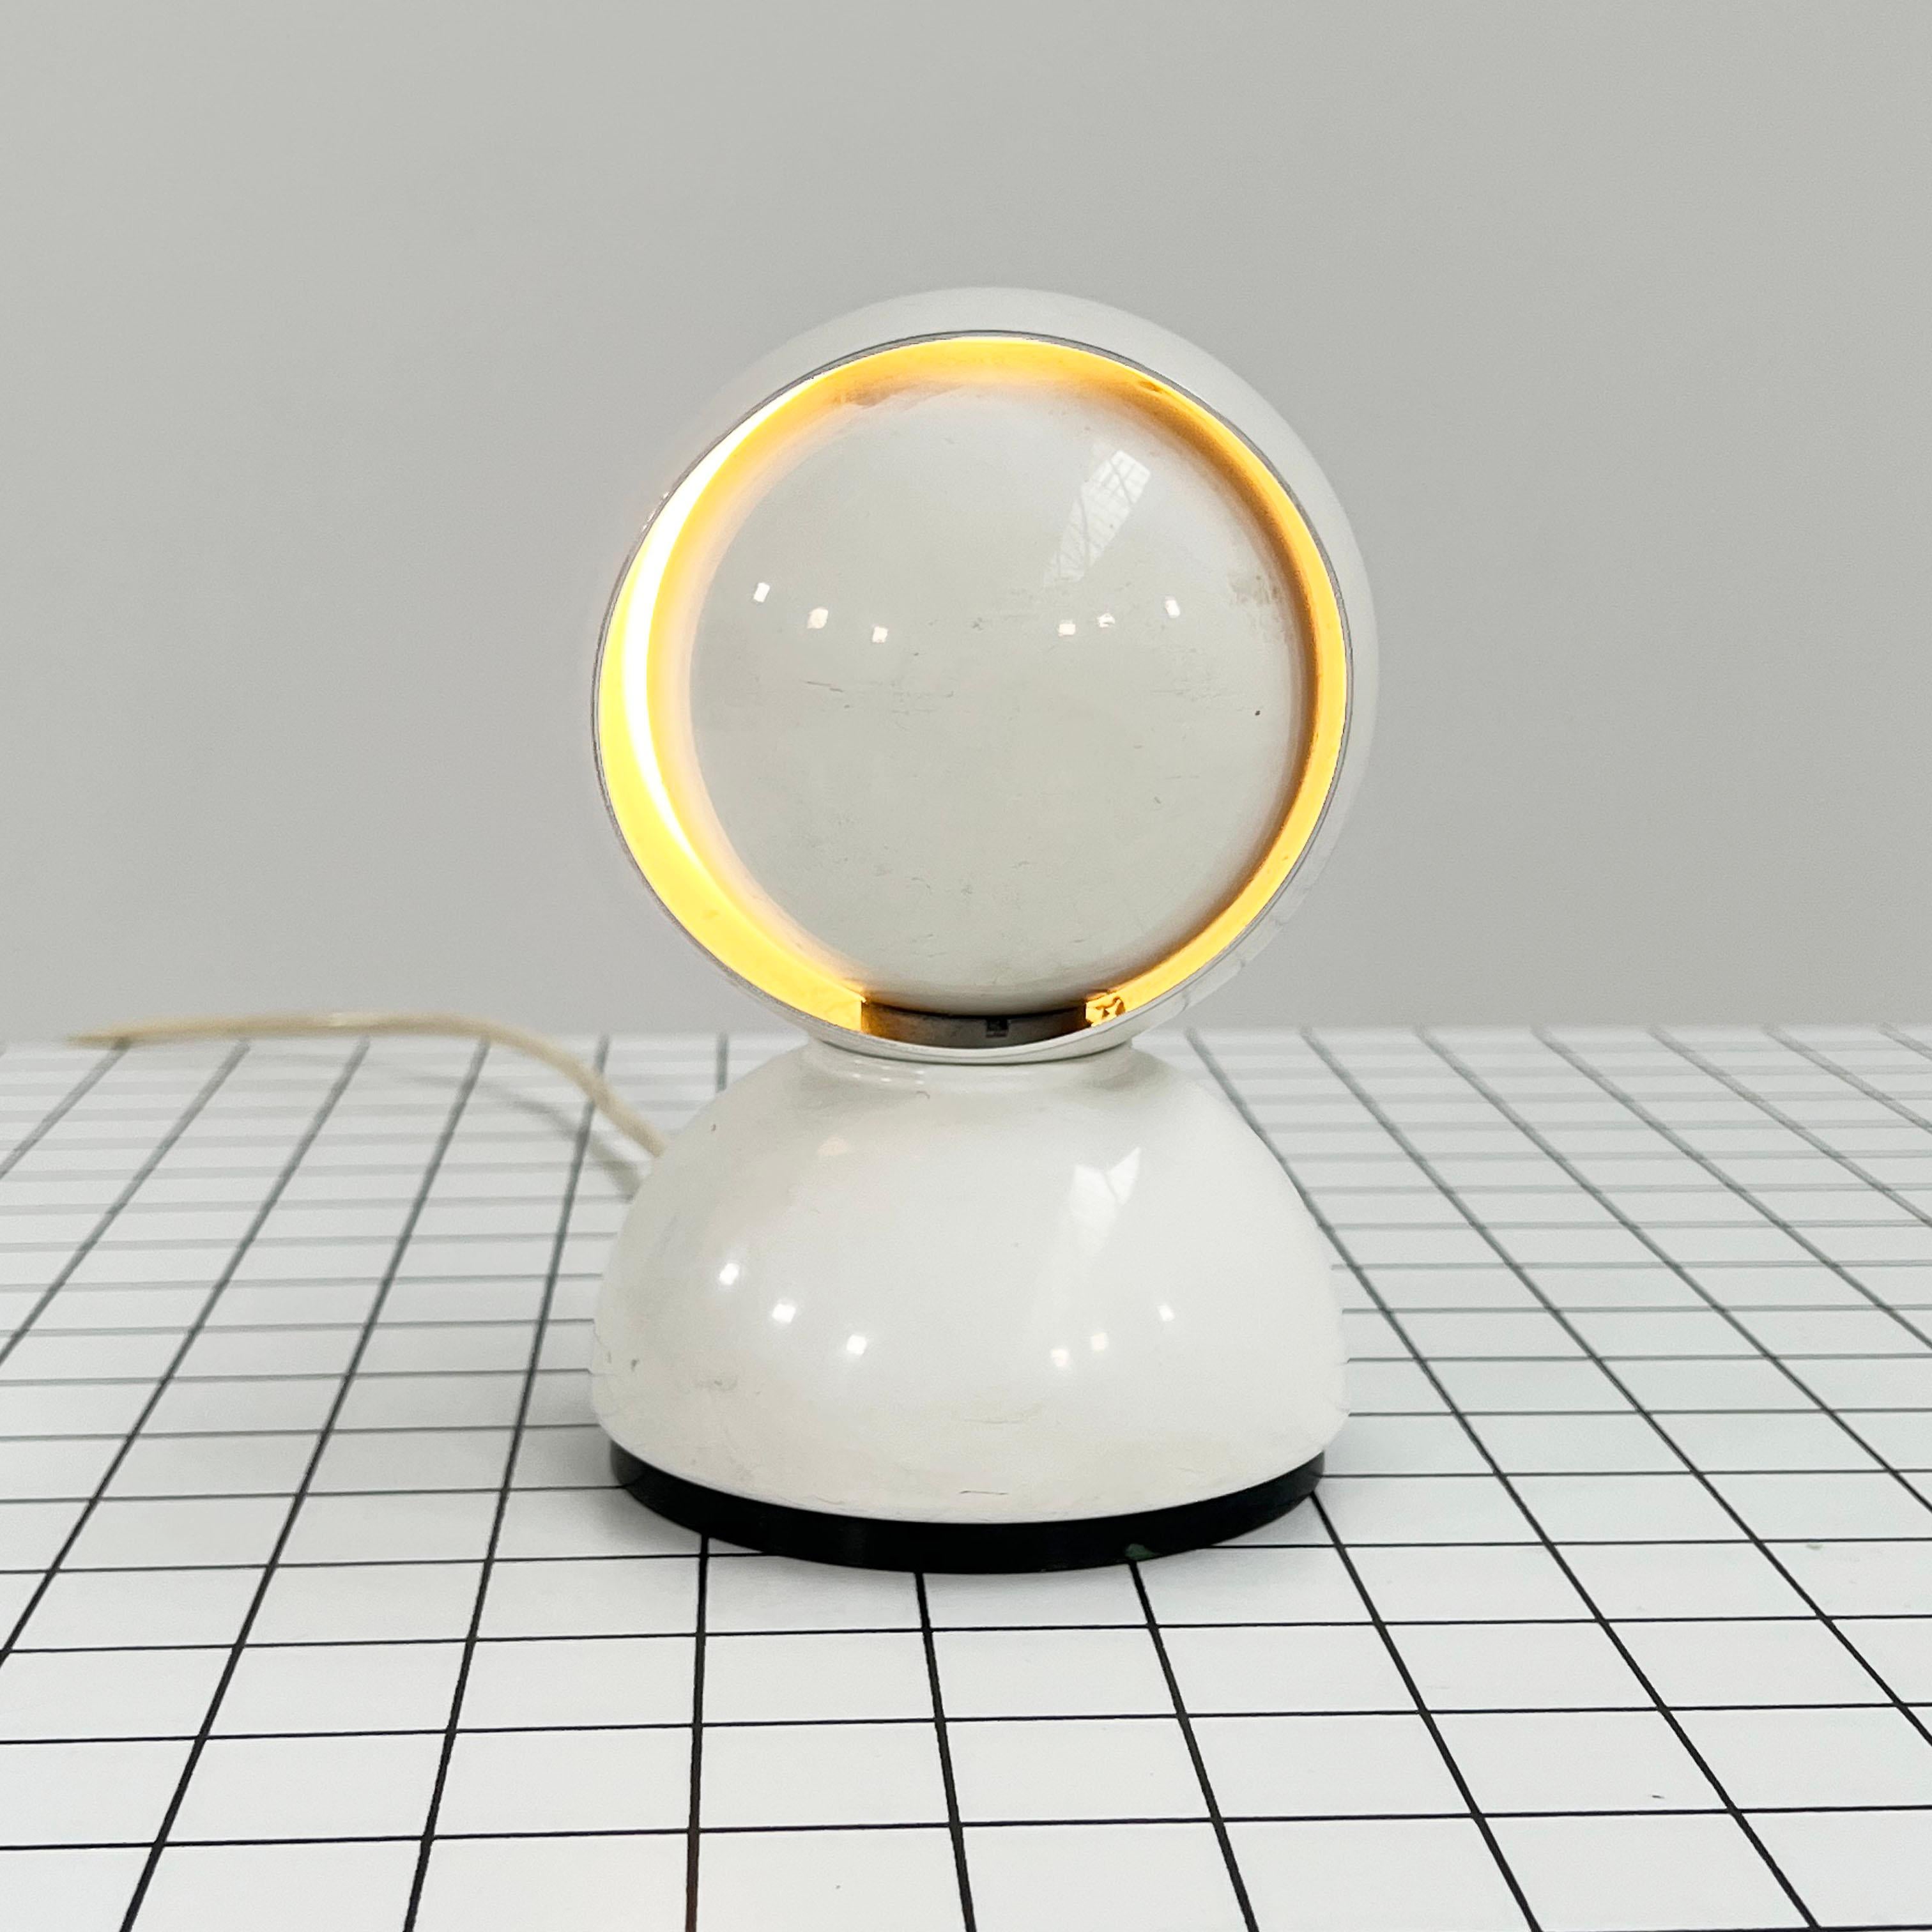 Designer - Vico Magistretti
Producer - Artemide
Model - Eclisse Table Lamp
Design Period - Sixties
Measurements - Width 12 cm x depth 12 cm x height 18.5 cm
Materials - Metal
Color - White
Light wear consistent with age and use. Some scuffs,